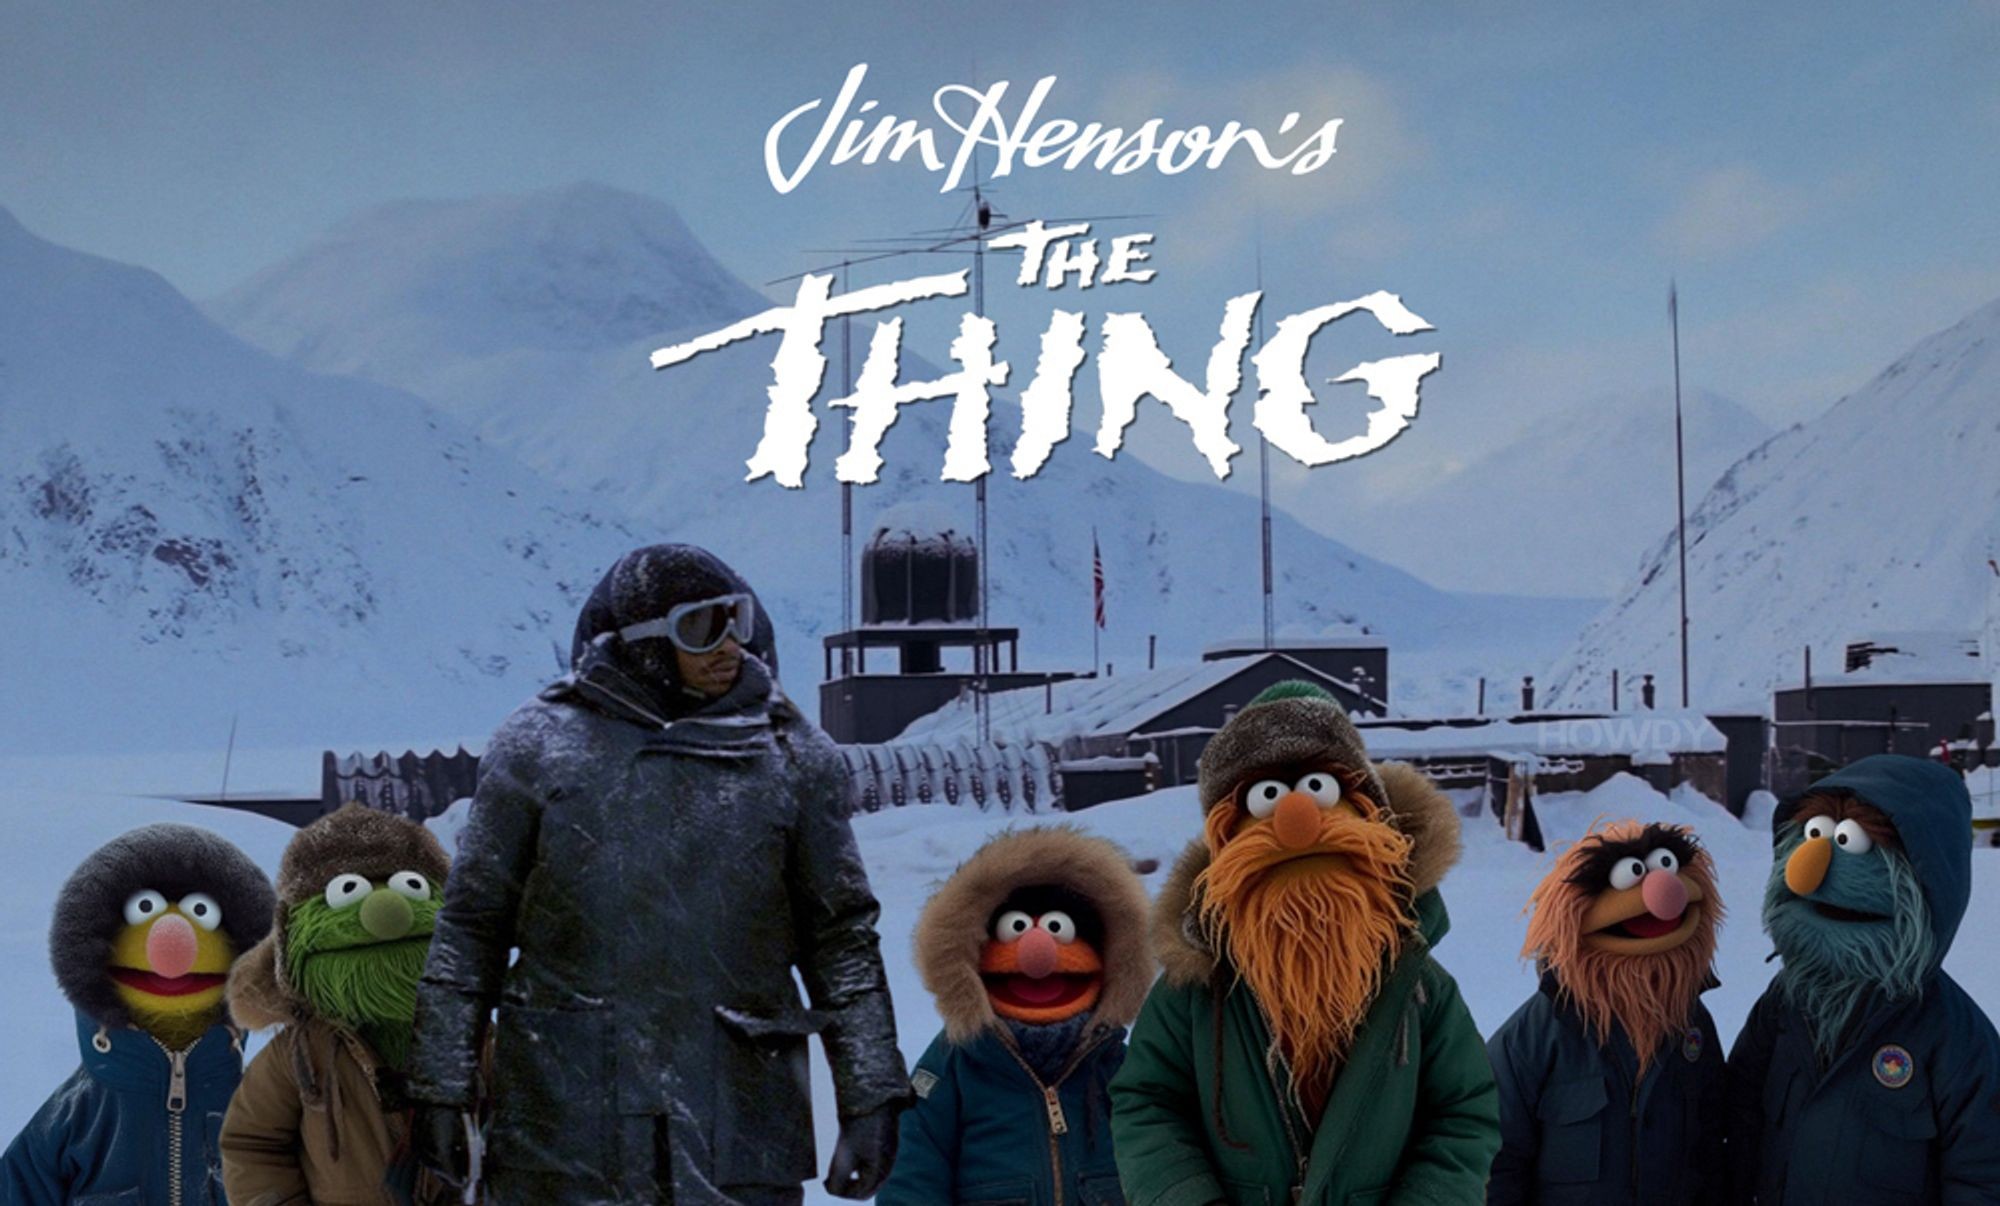 Movie poster/splash screen for Jim Henson's The Thing, picturing Muppets in snow gear, at the Antarctic base featured in the film. And also Keith David, still.